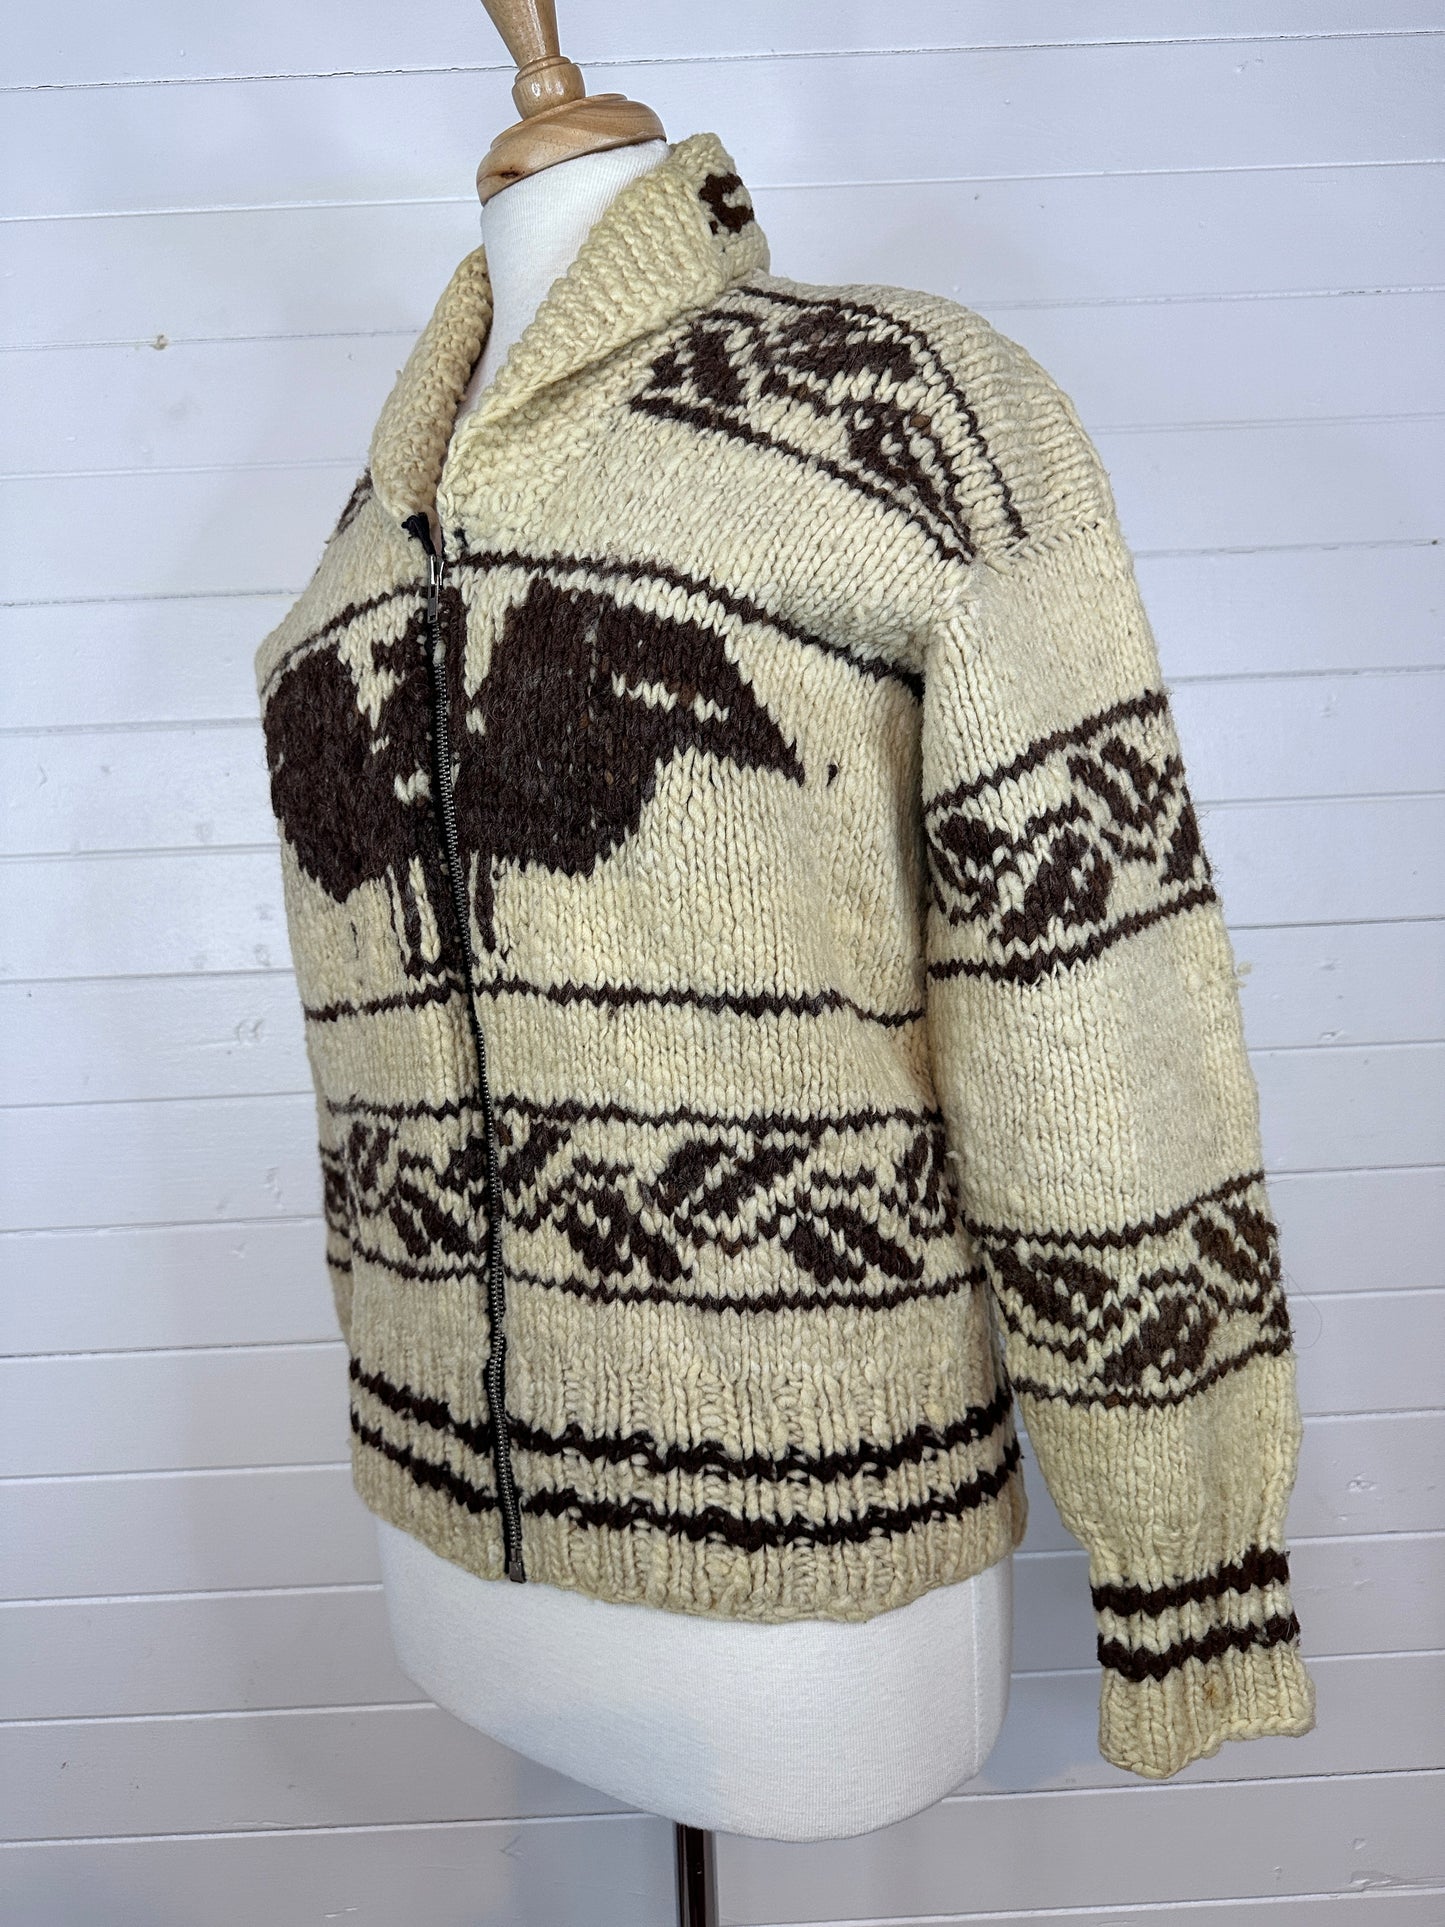 Authentic Cowichan Sweater - Ladies Small to Medium